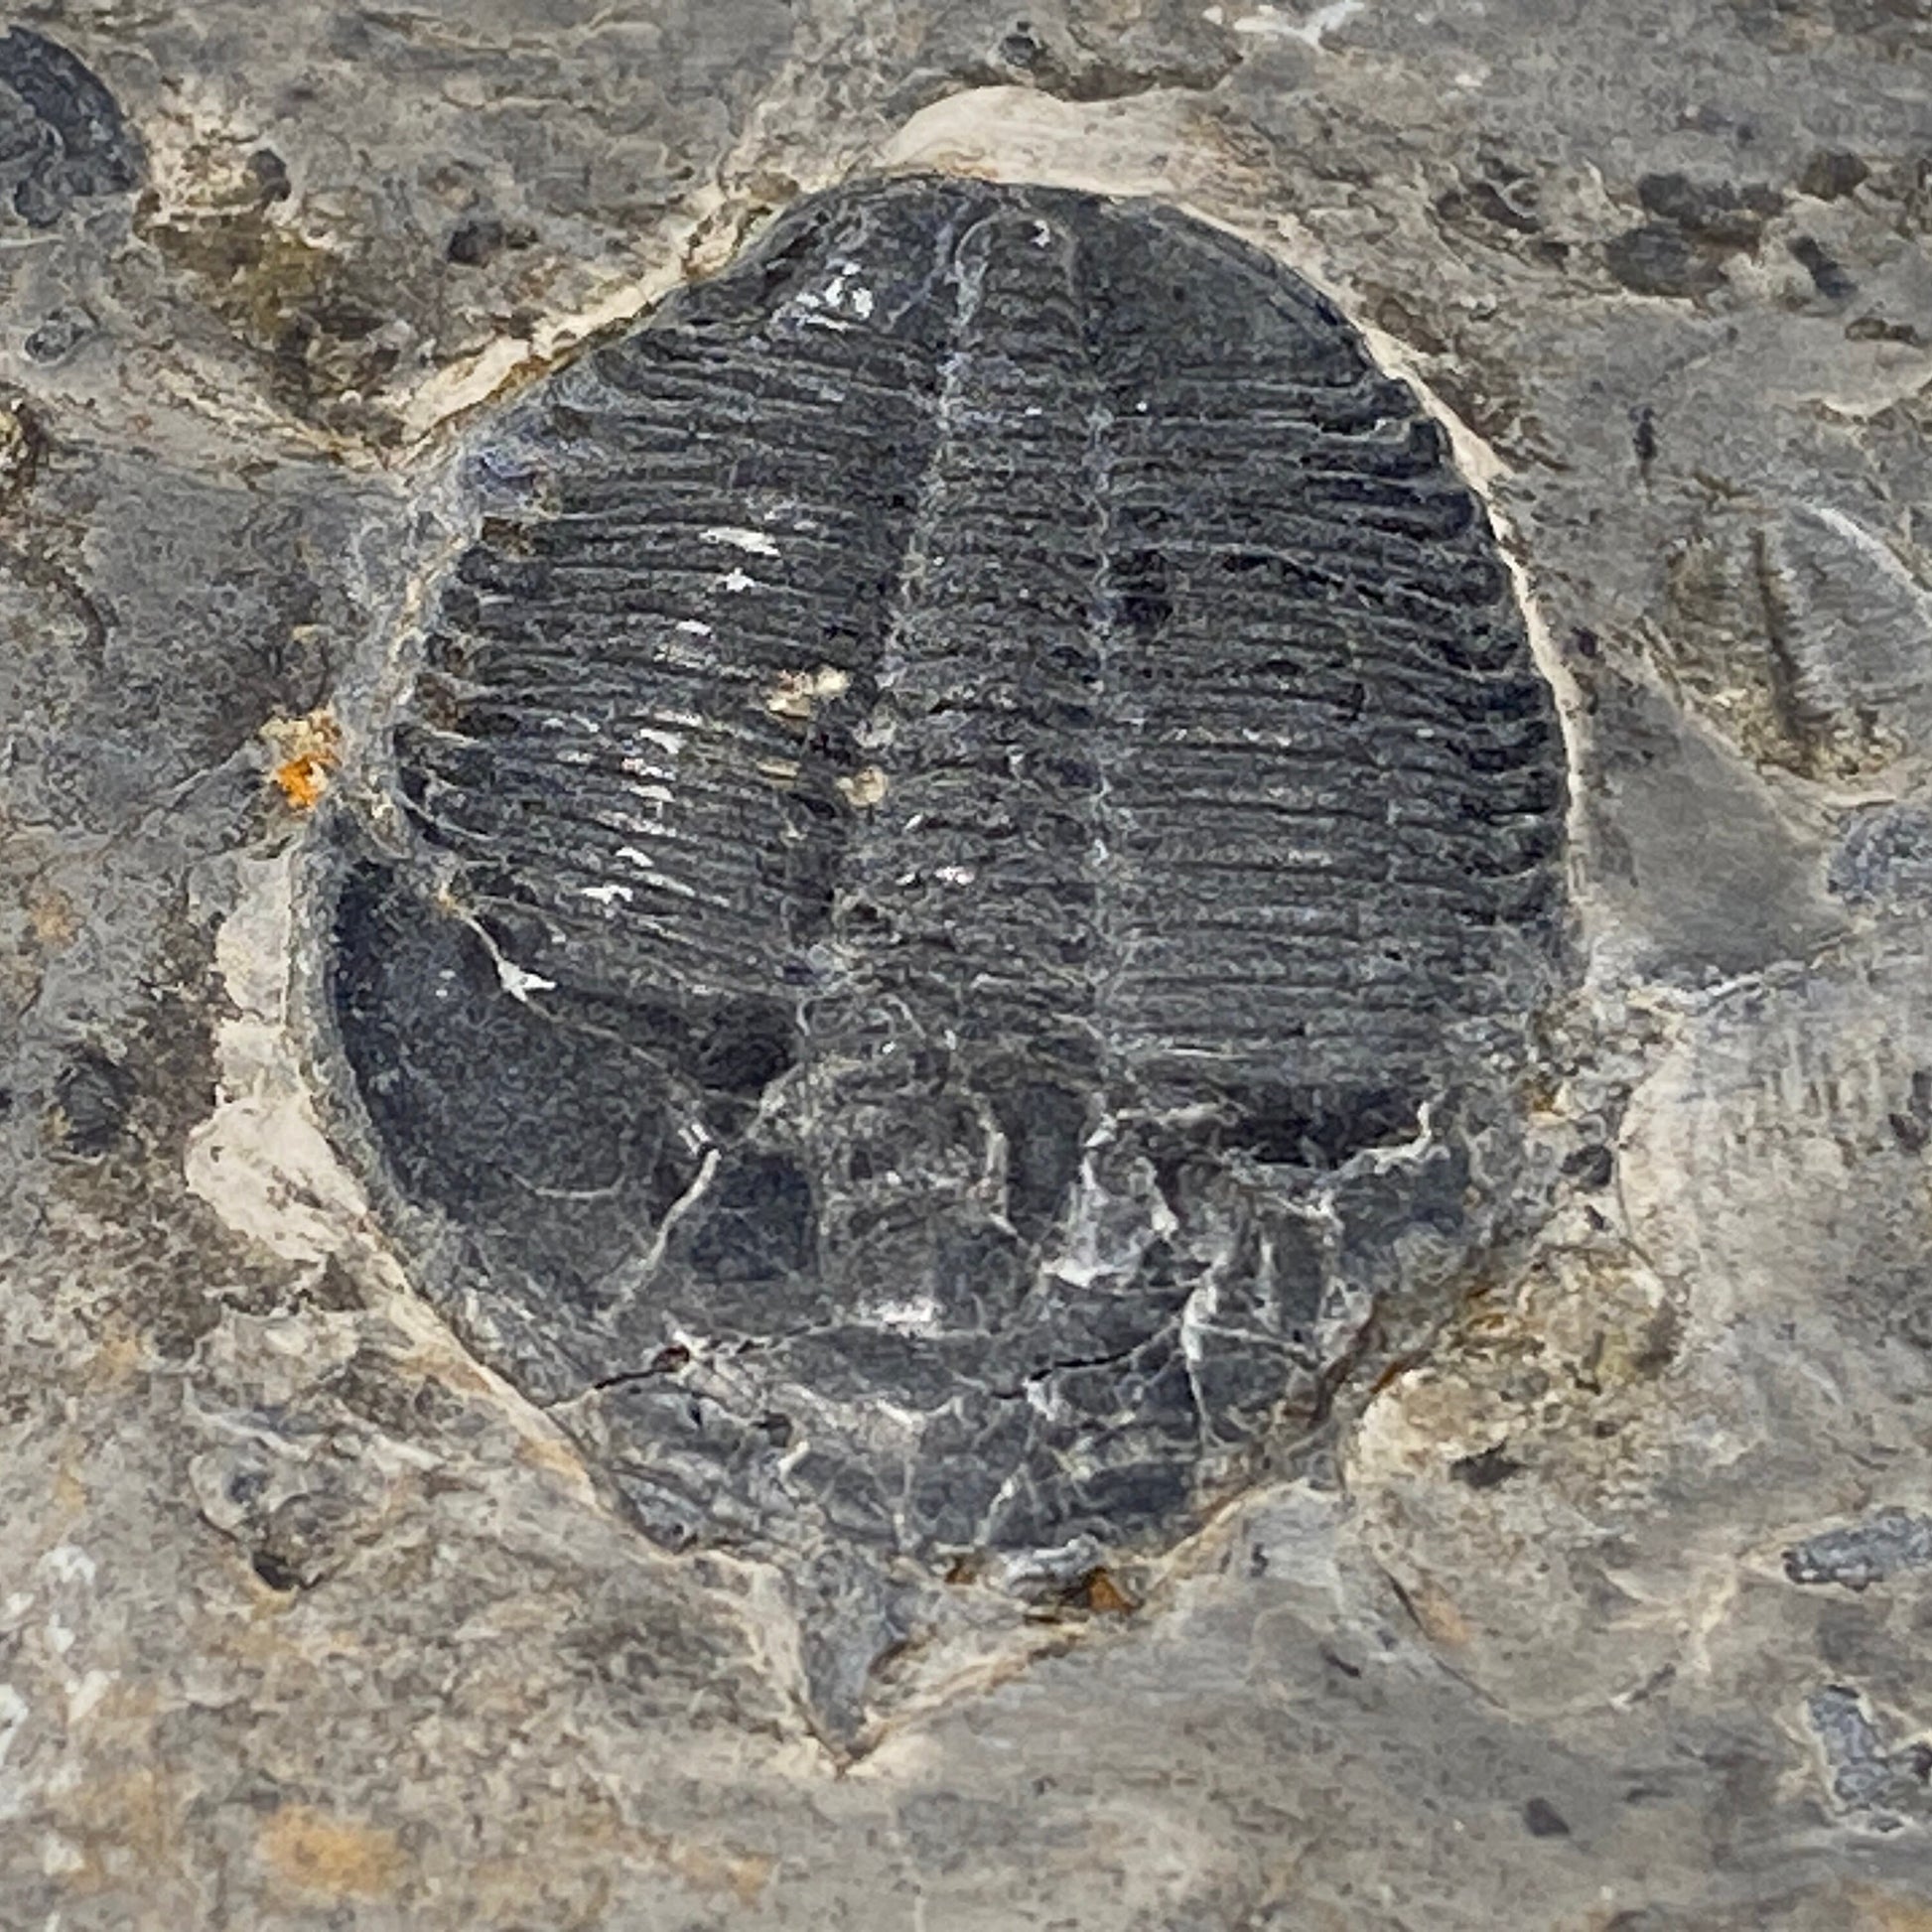 Trilobite fossils in Utah shale | fossil decor, Utah fossil, fossil collectible, trilobite specimen, Elrathia King, fossil lover gift